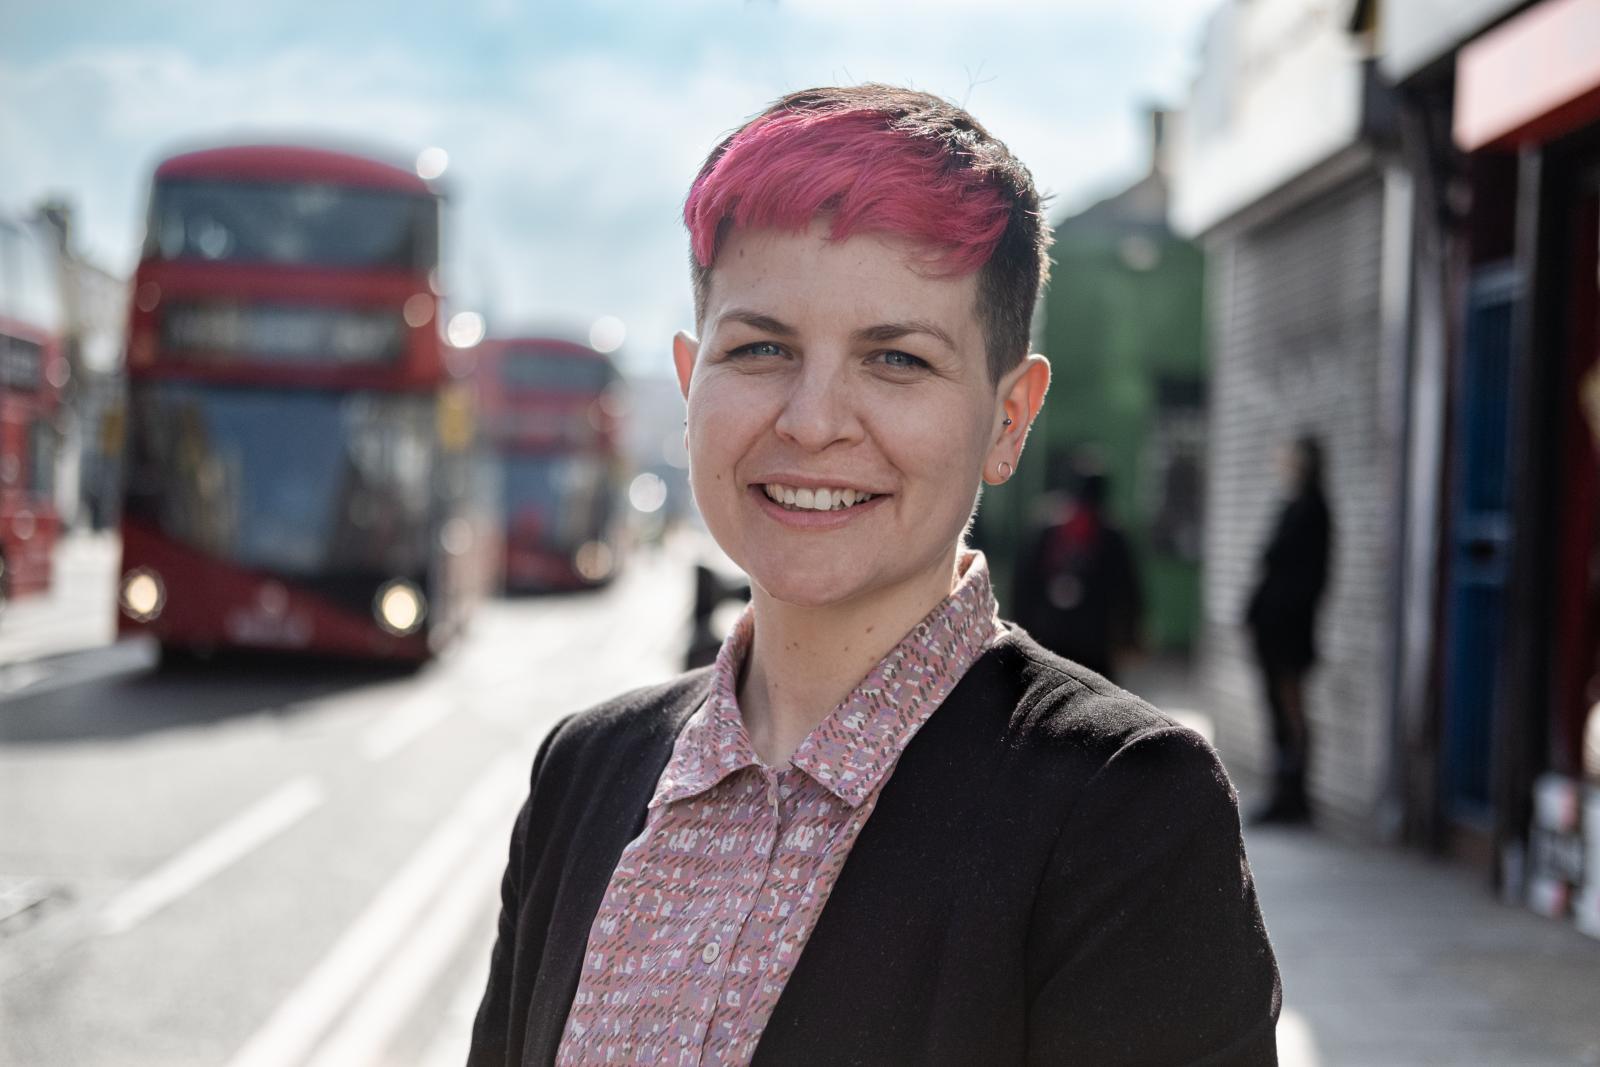 Zoe Garbett is the Green Party candidate for London mayor